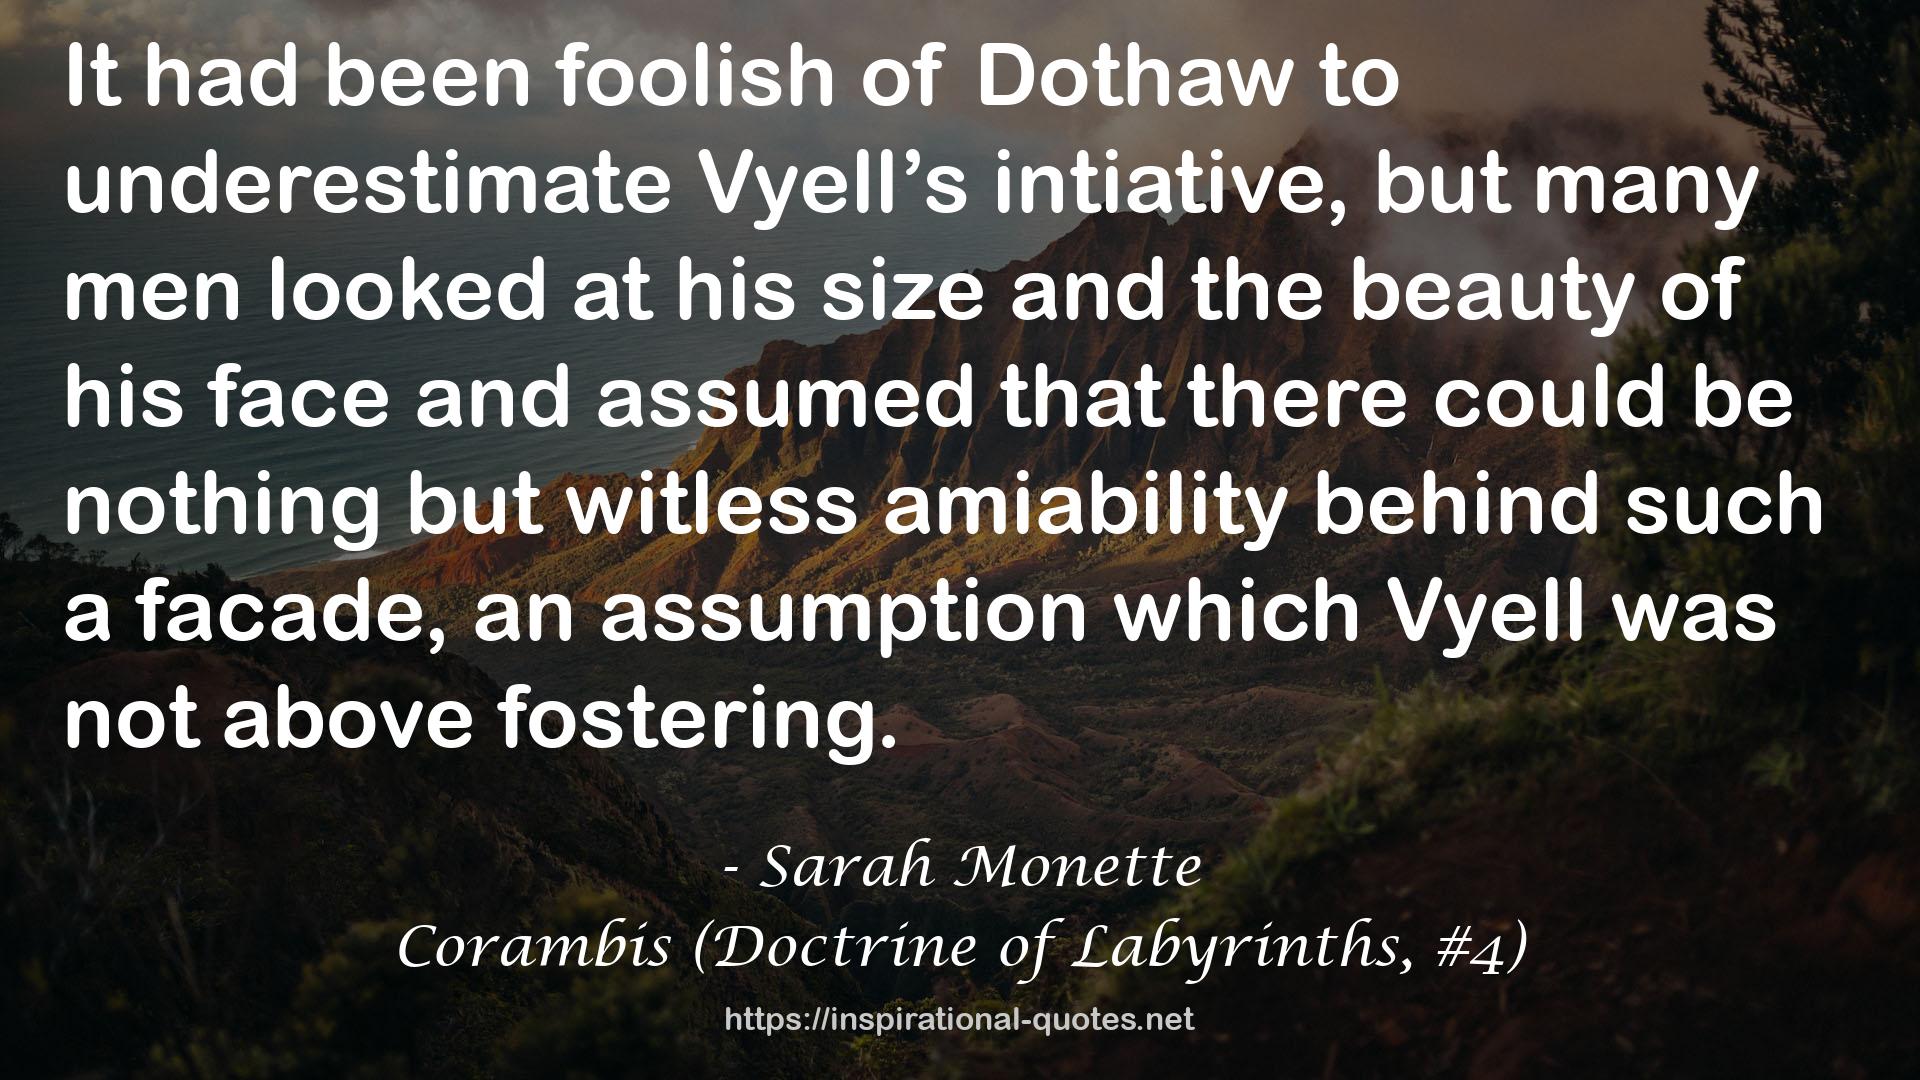 Corambis (Doctrine of Labyrinths, #4) QUOTES